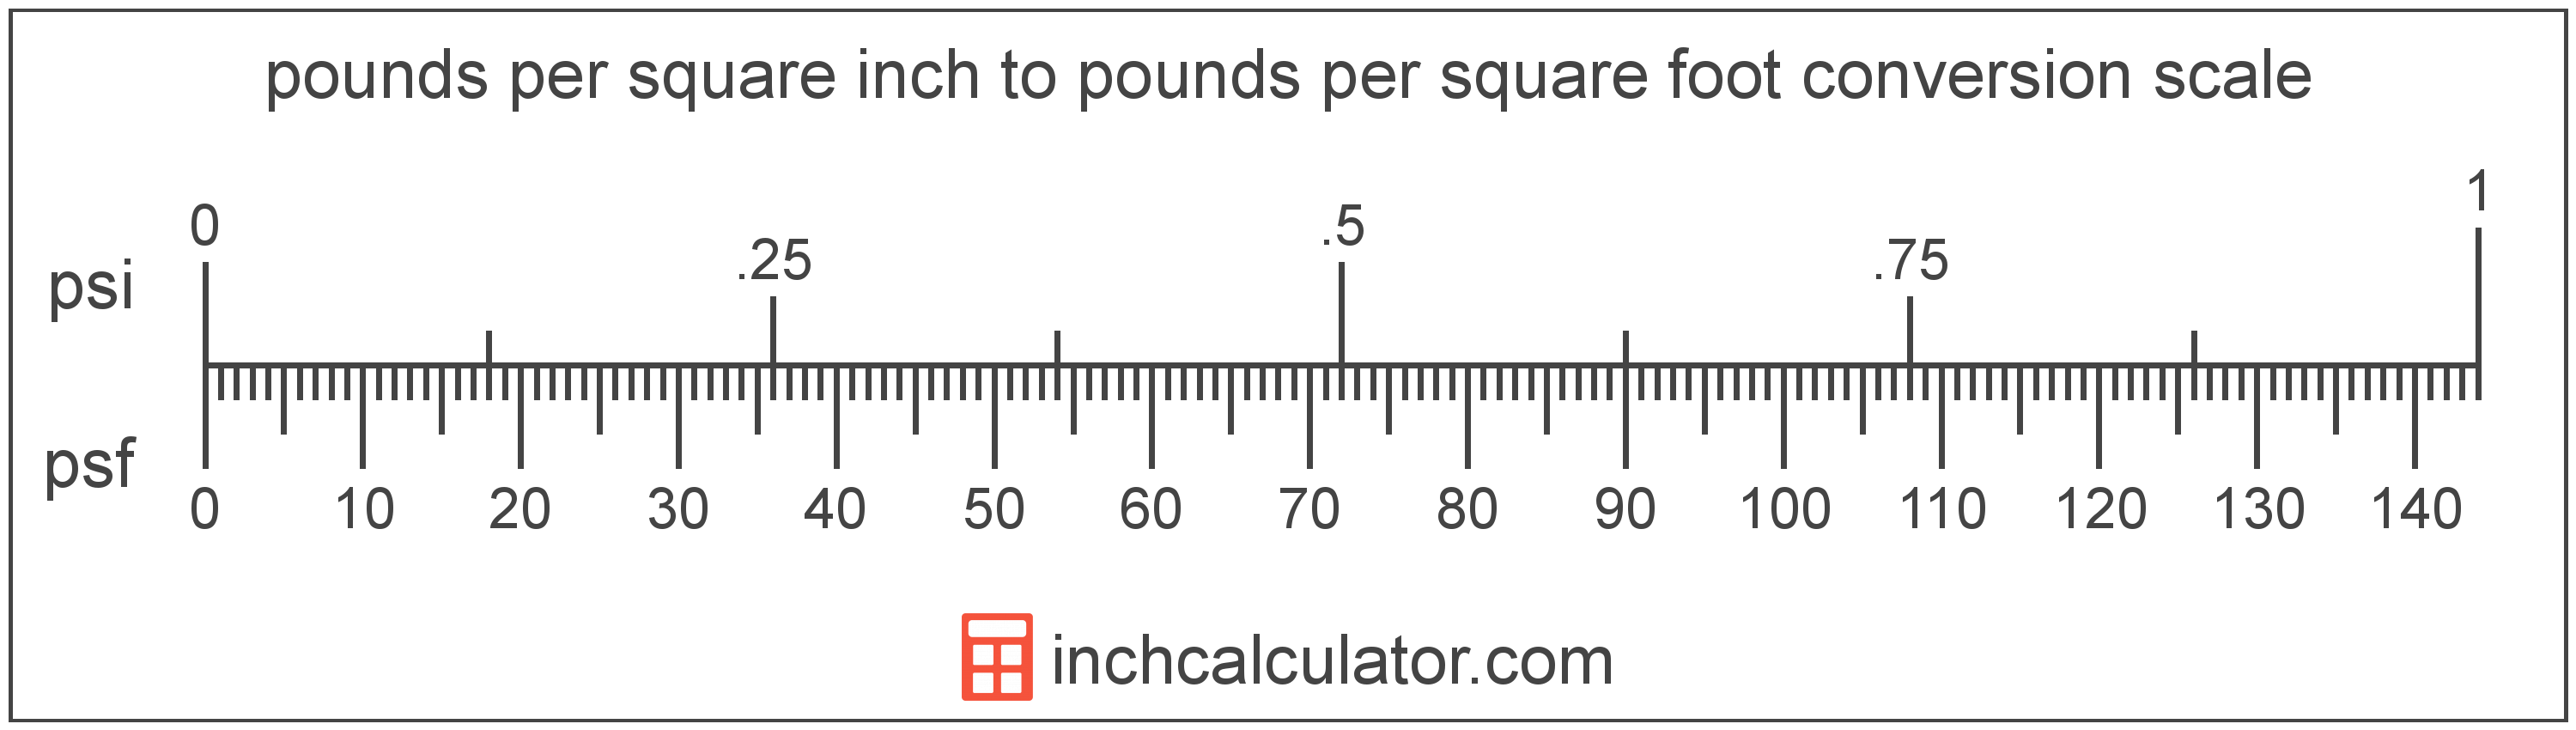 conversion scale showing pounds per square inch and equivalent pounds per square foot pressure values